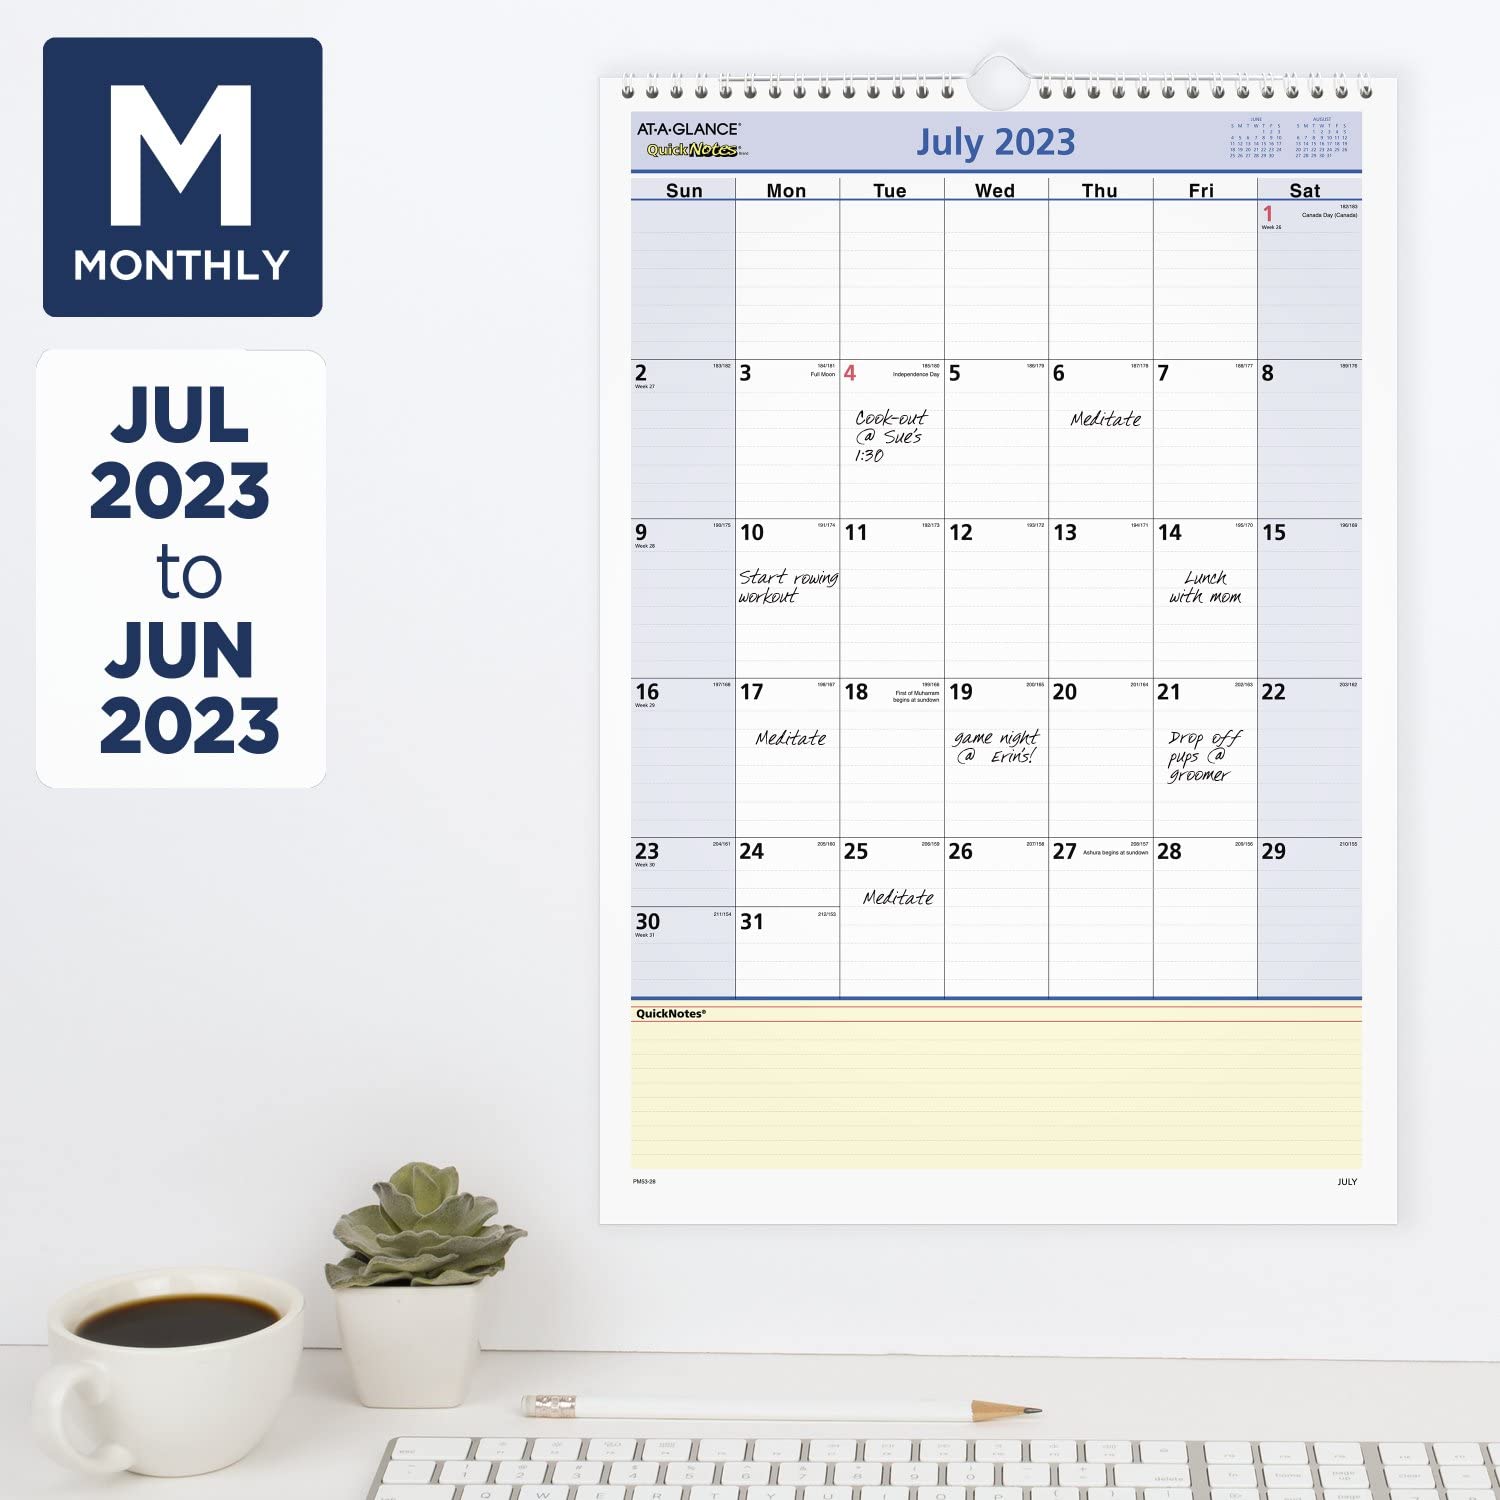 AT-A-GLANCE 2023-2024 Academic Wall Calendar, Monthly, 12" x 17", Medium, Ruled Daily Blocks, QuickNotes (PM5328)